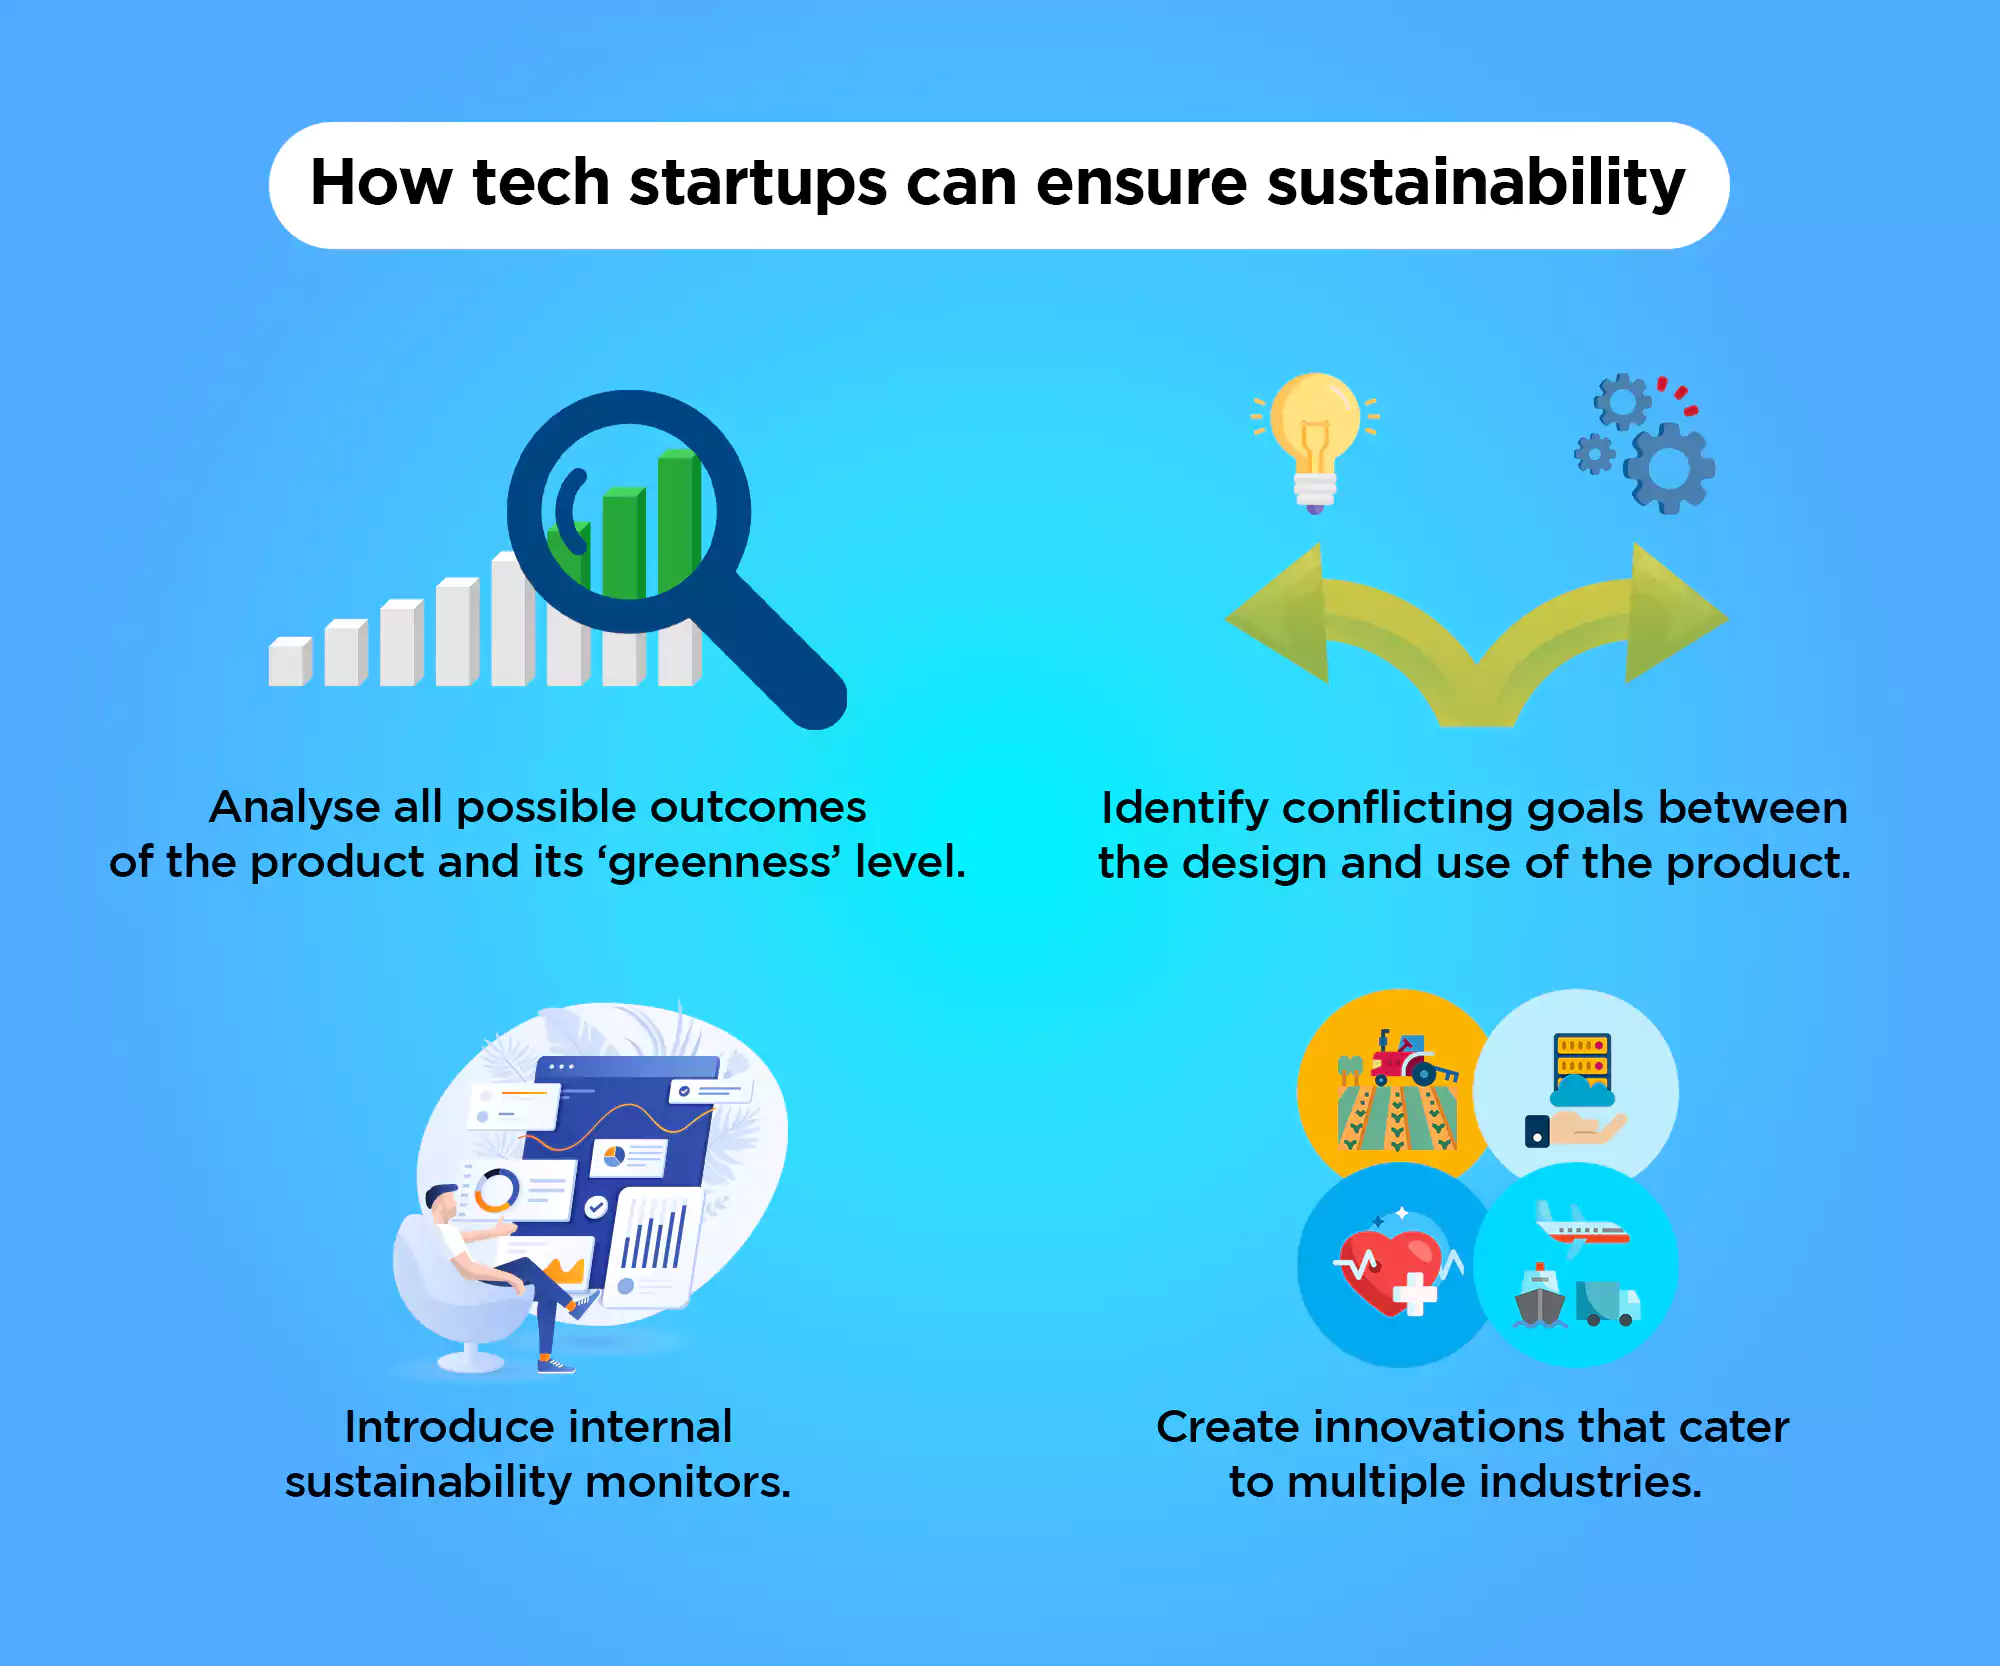 How tech startups can ensure sustainability